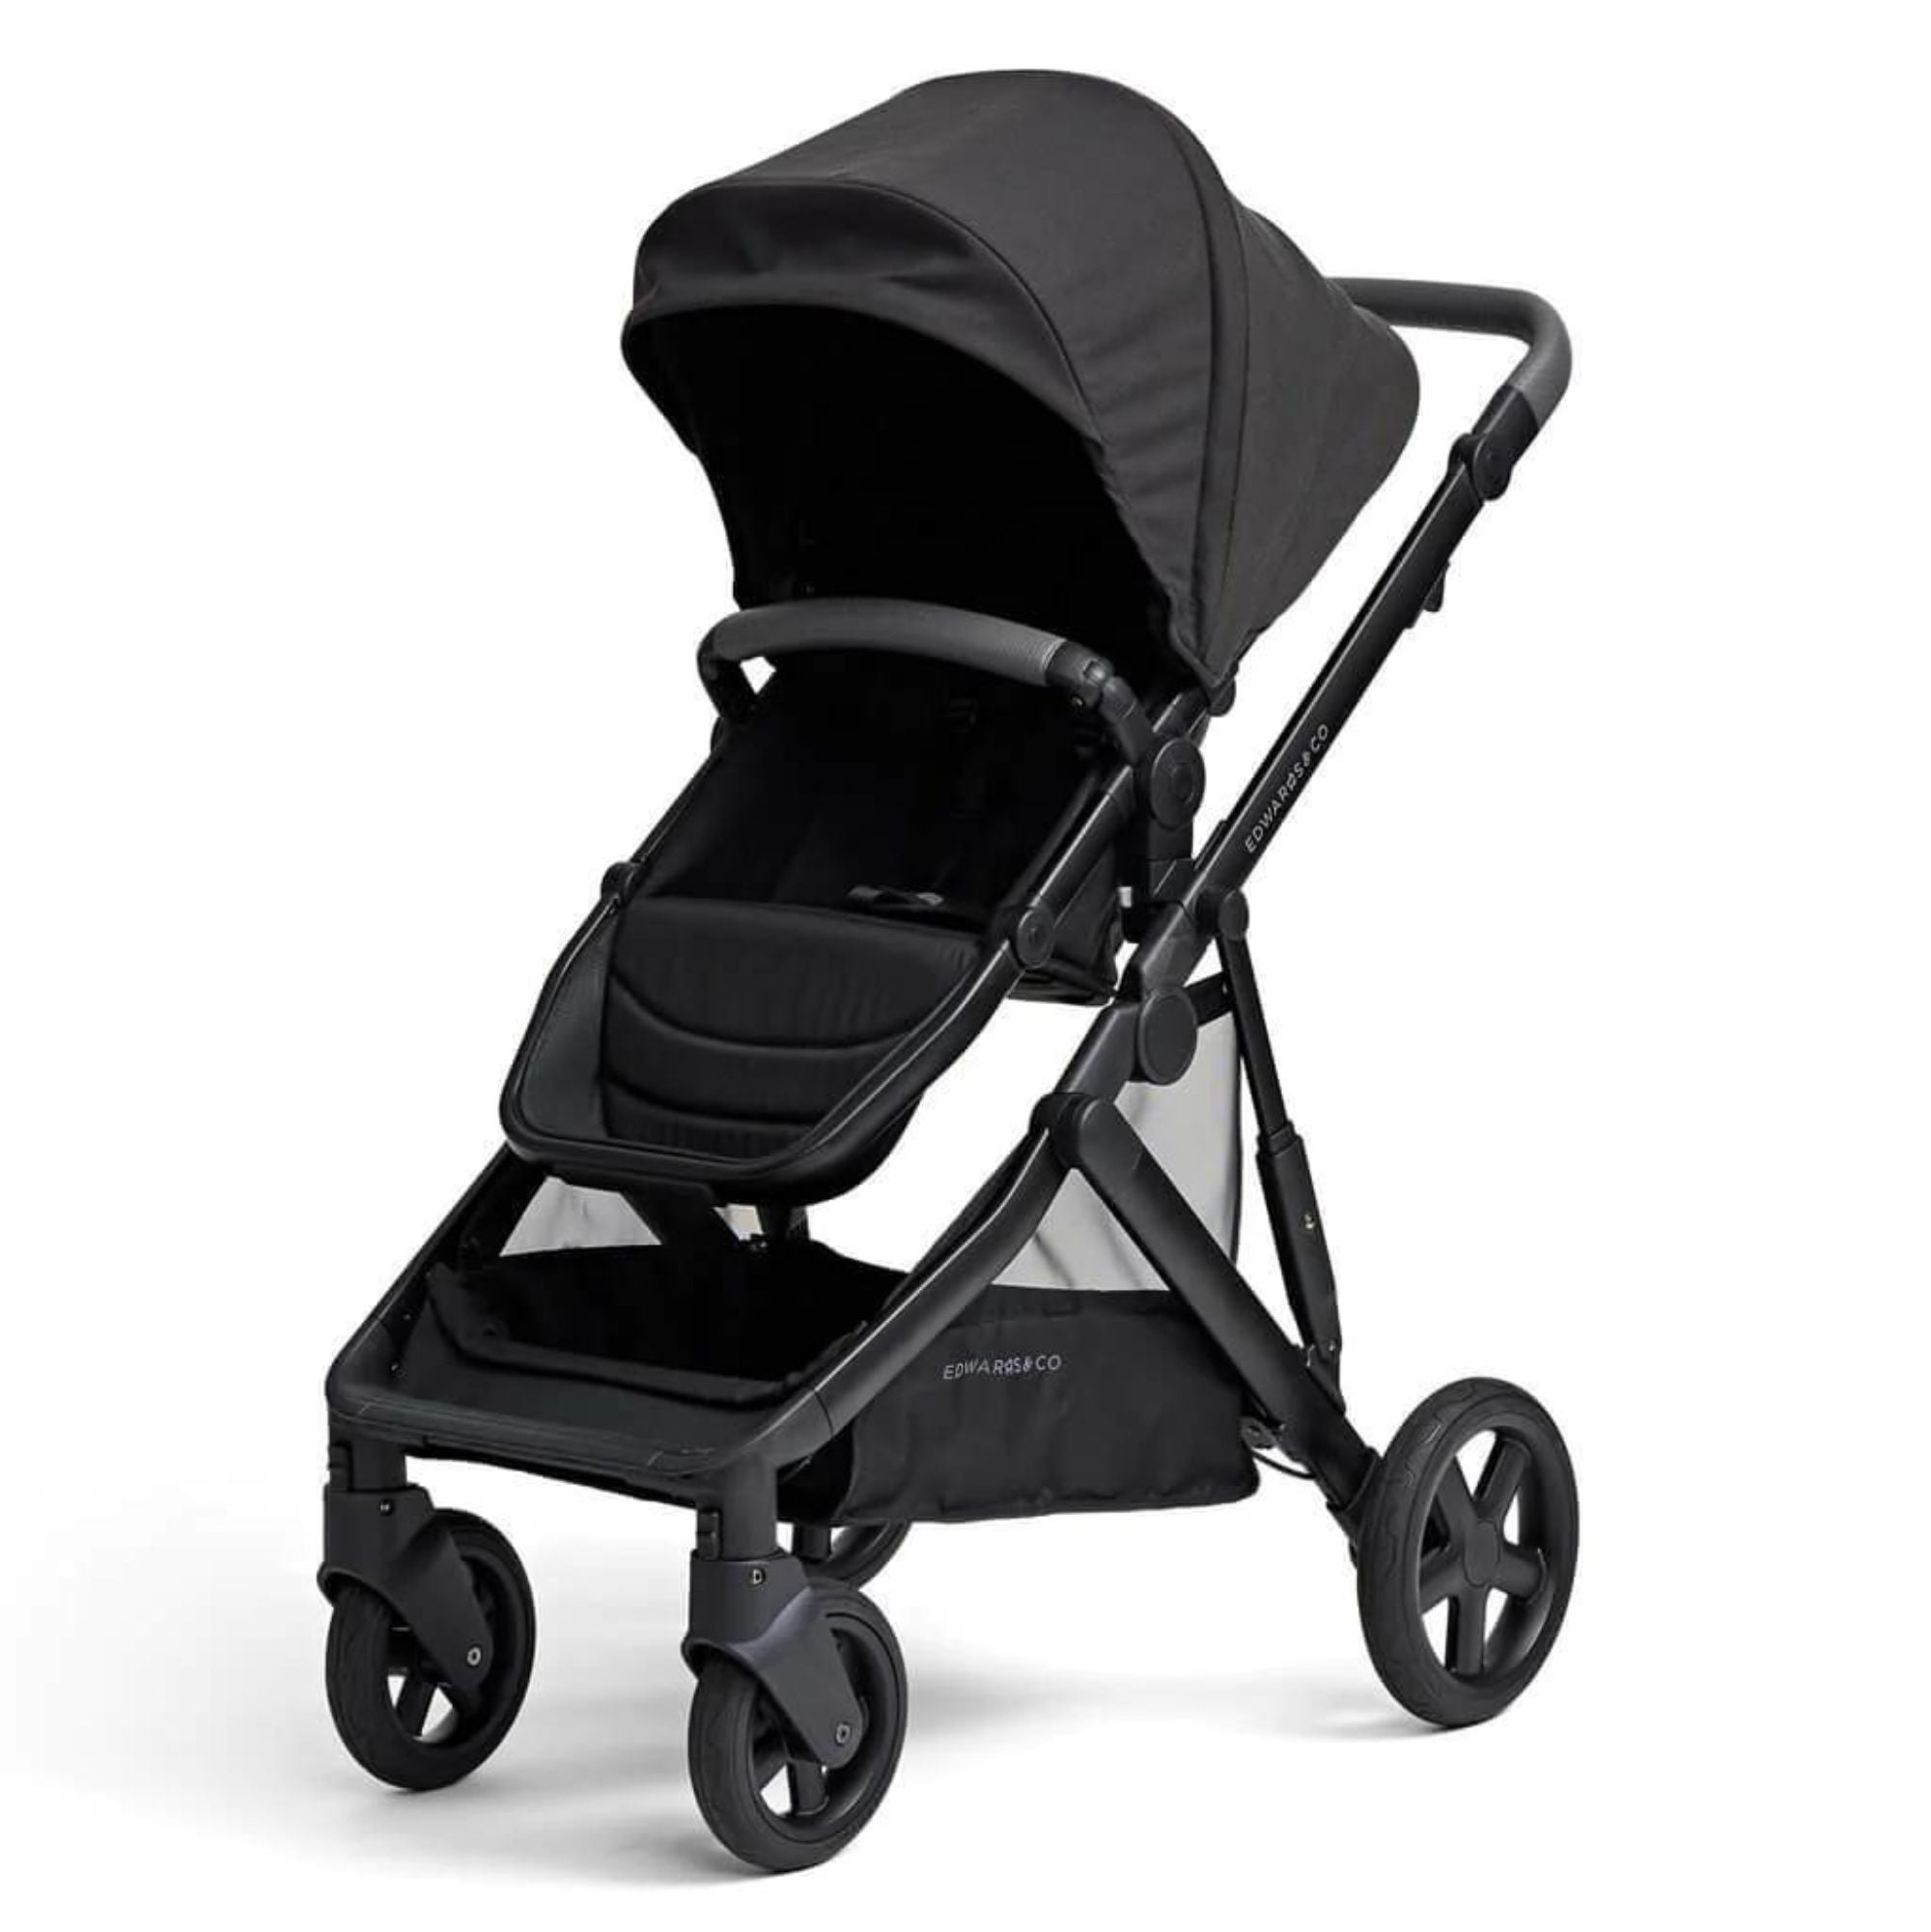 Edwards & Co Olive Stroller BLACK LUX Free Newborn Cushion - Tiny Tots Baby Store 